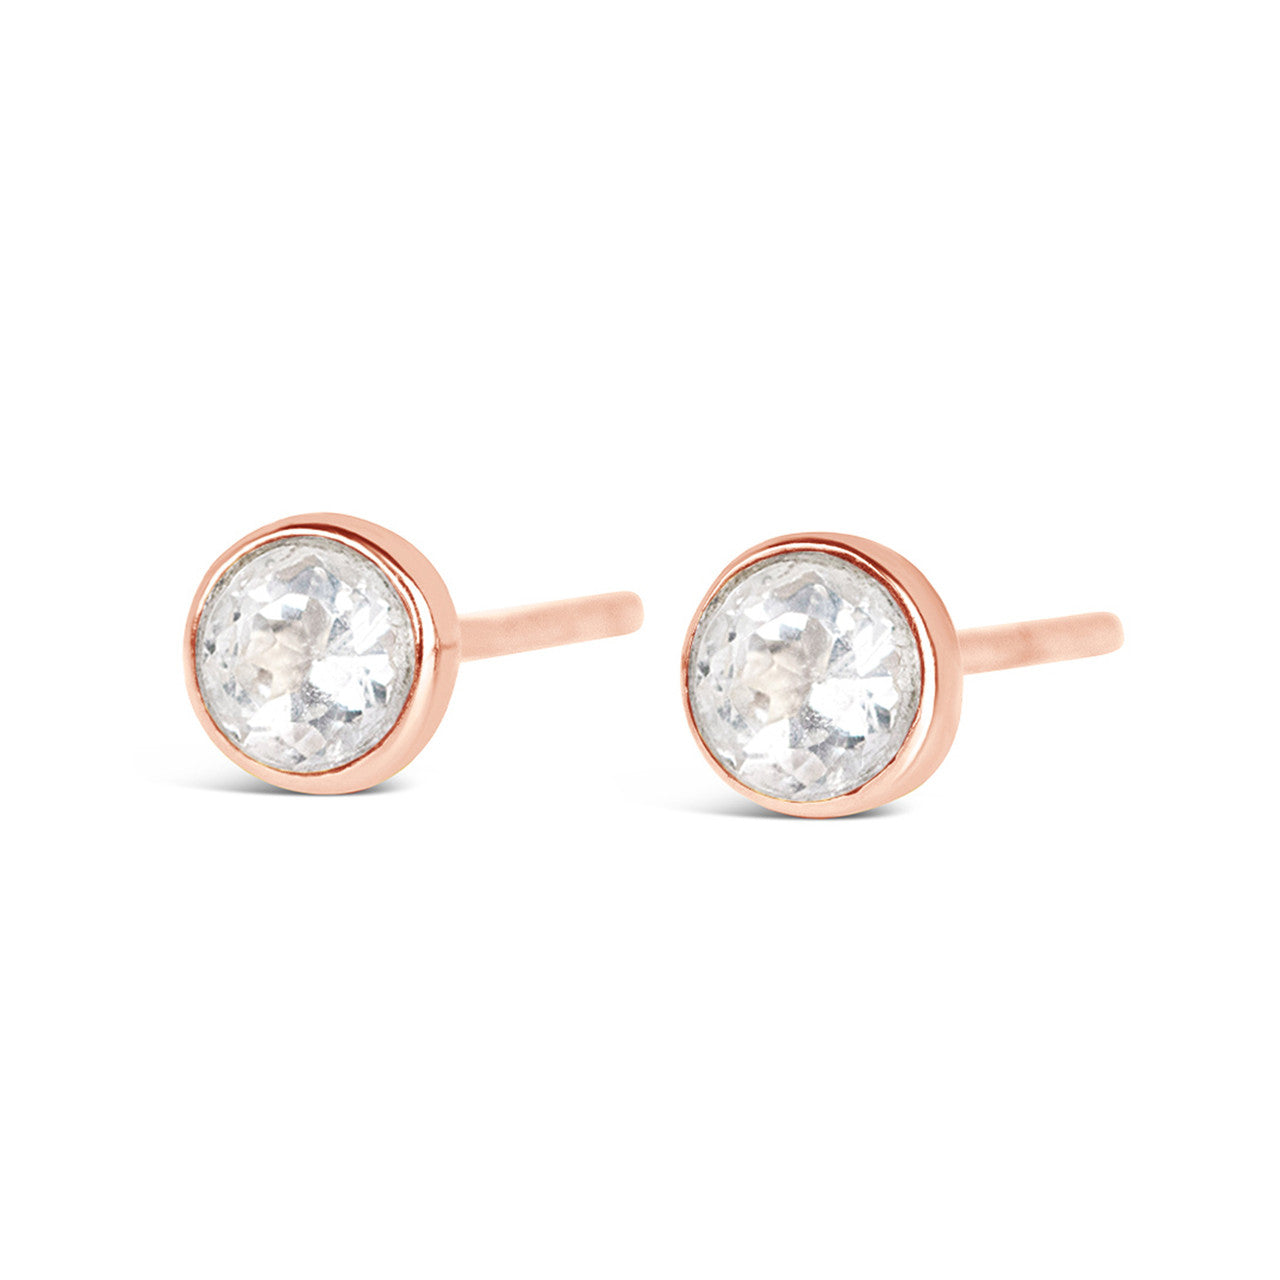 White quartz mini studs in rose gold facing the front on a white background